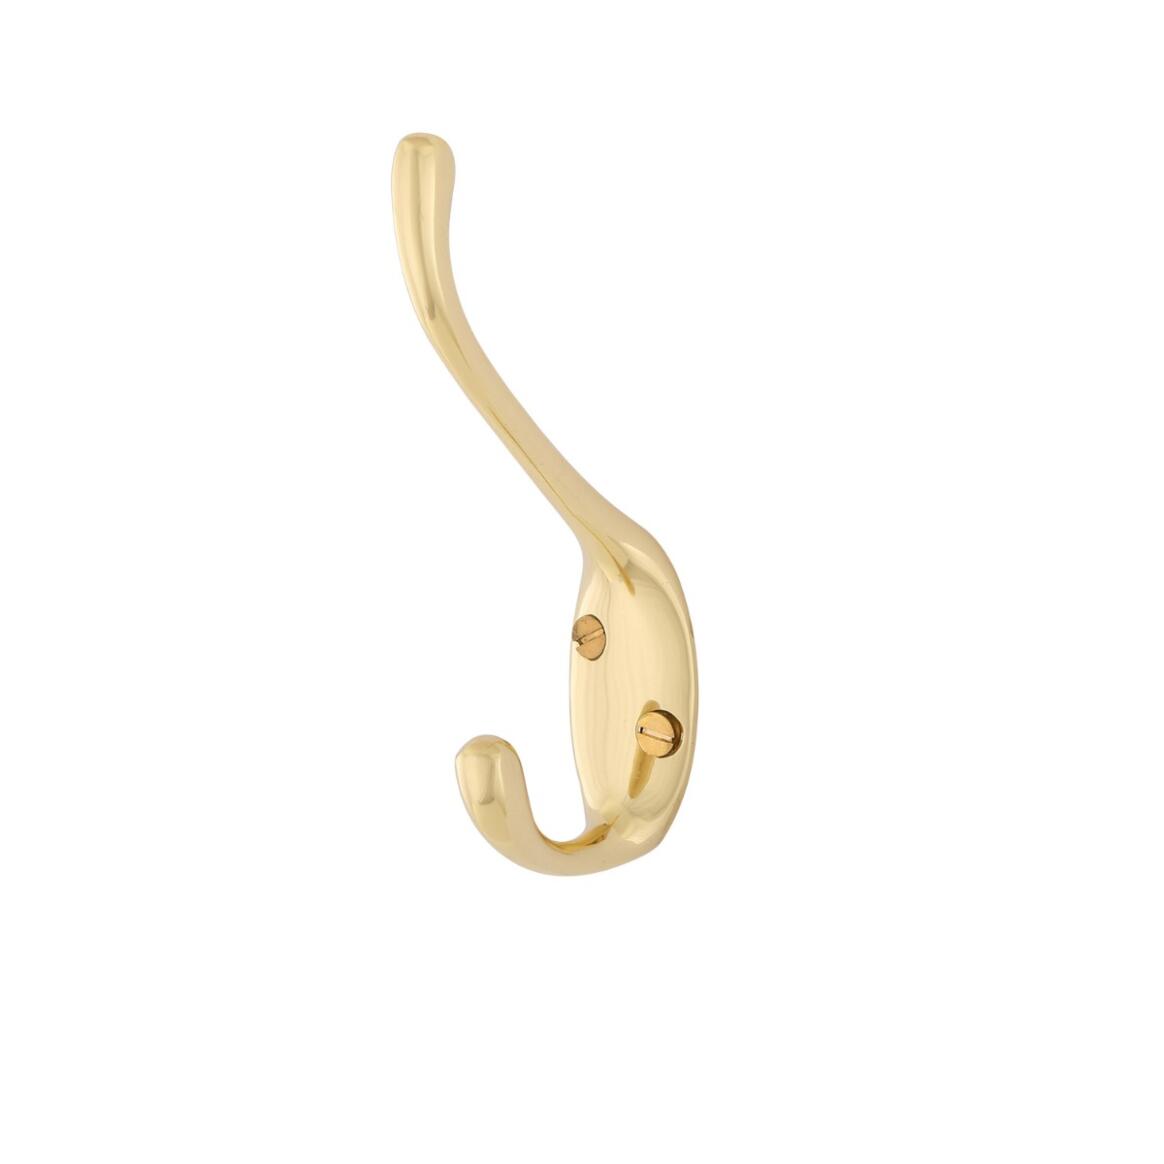 Glin Brass Hat and Coat Hook 2.2x4.3" main product image